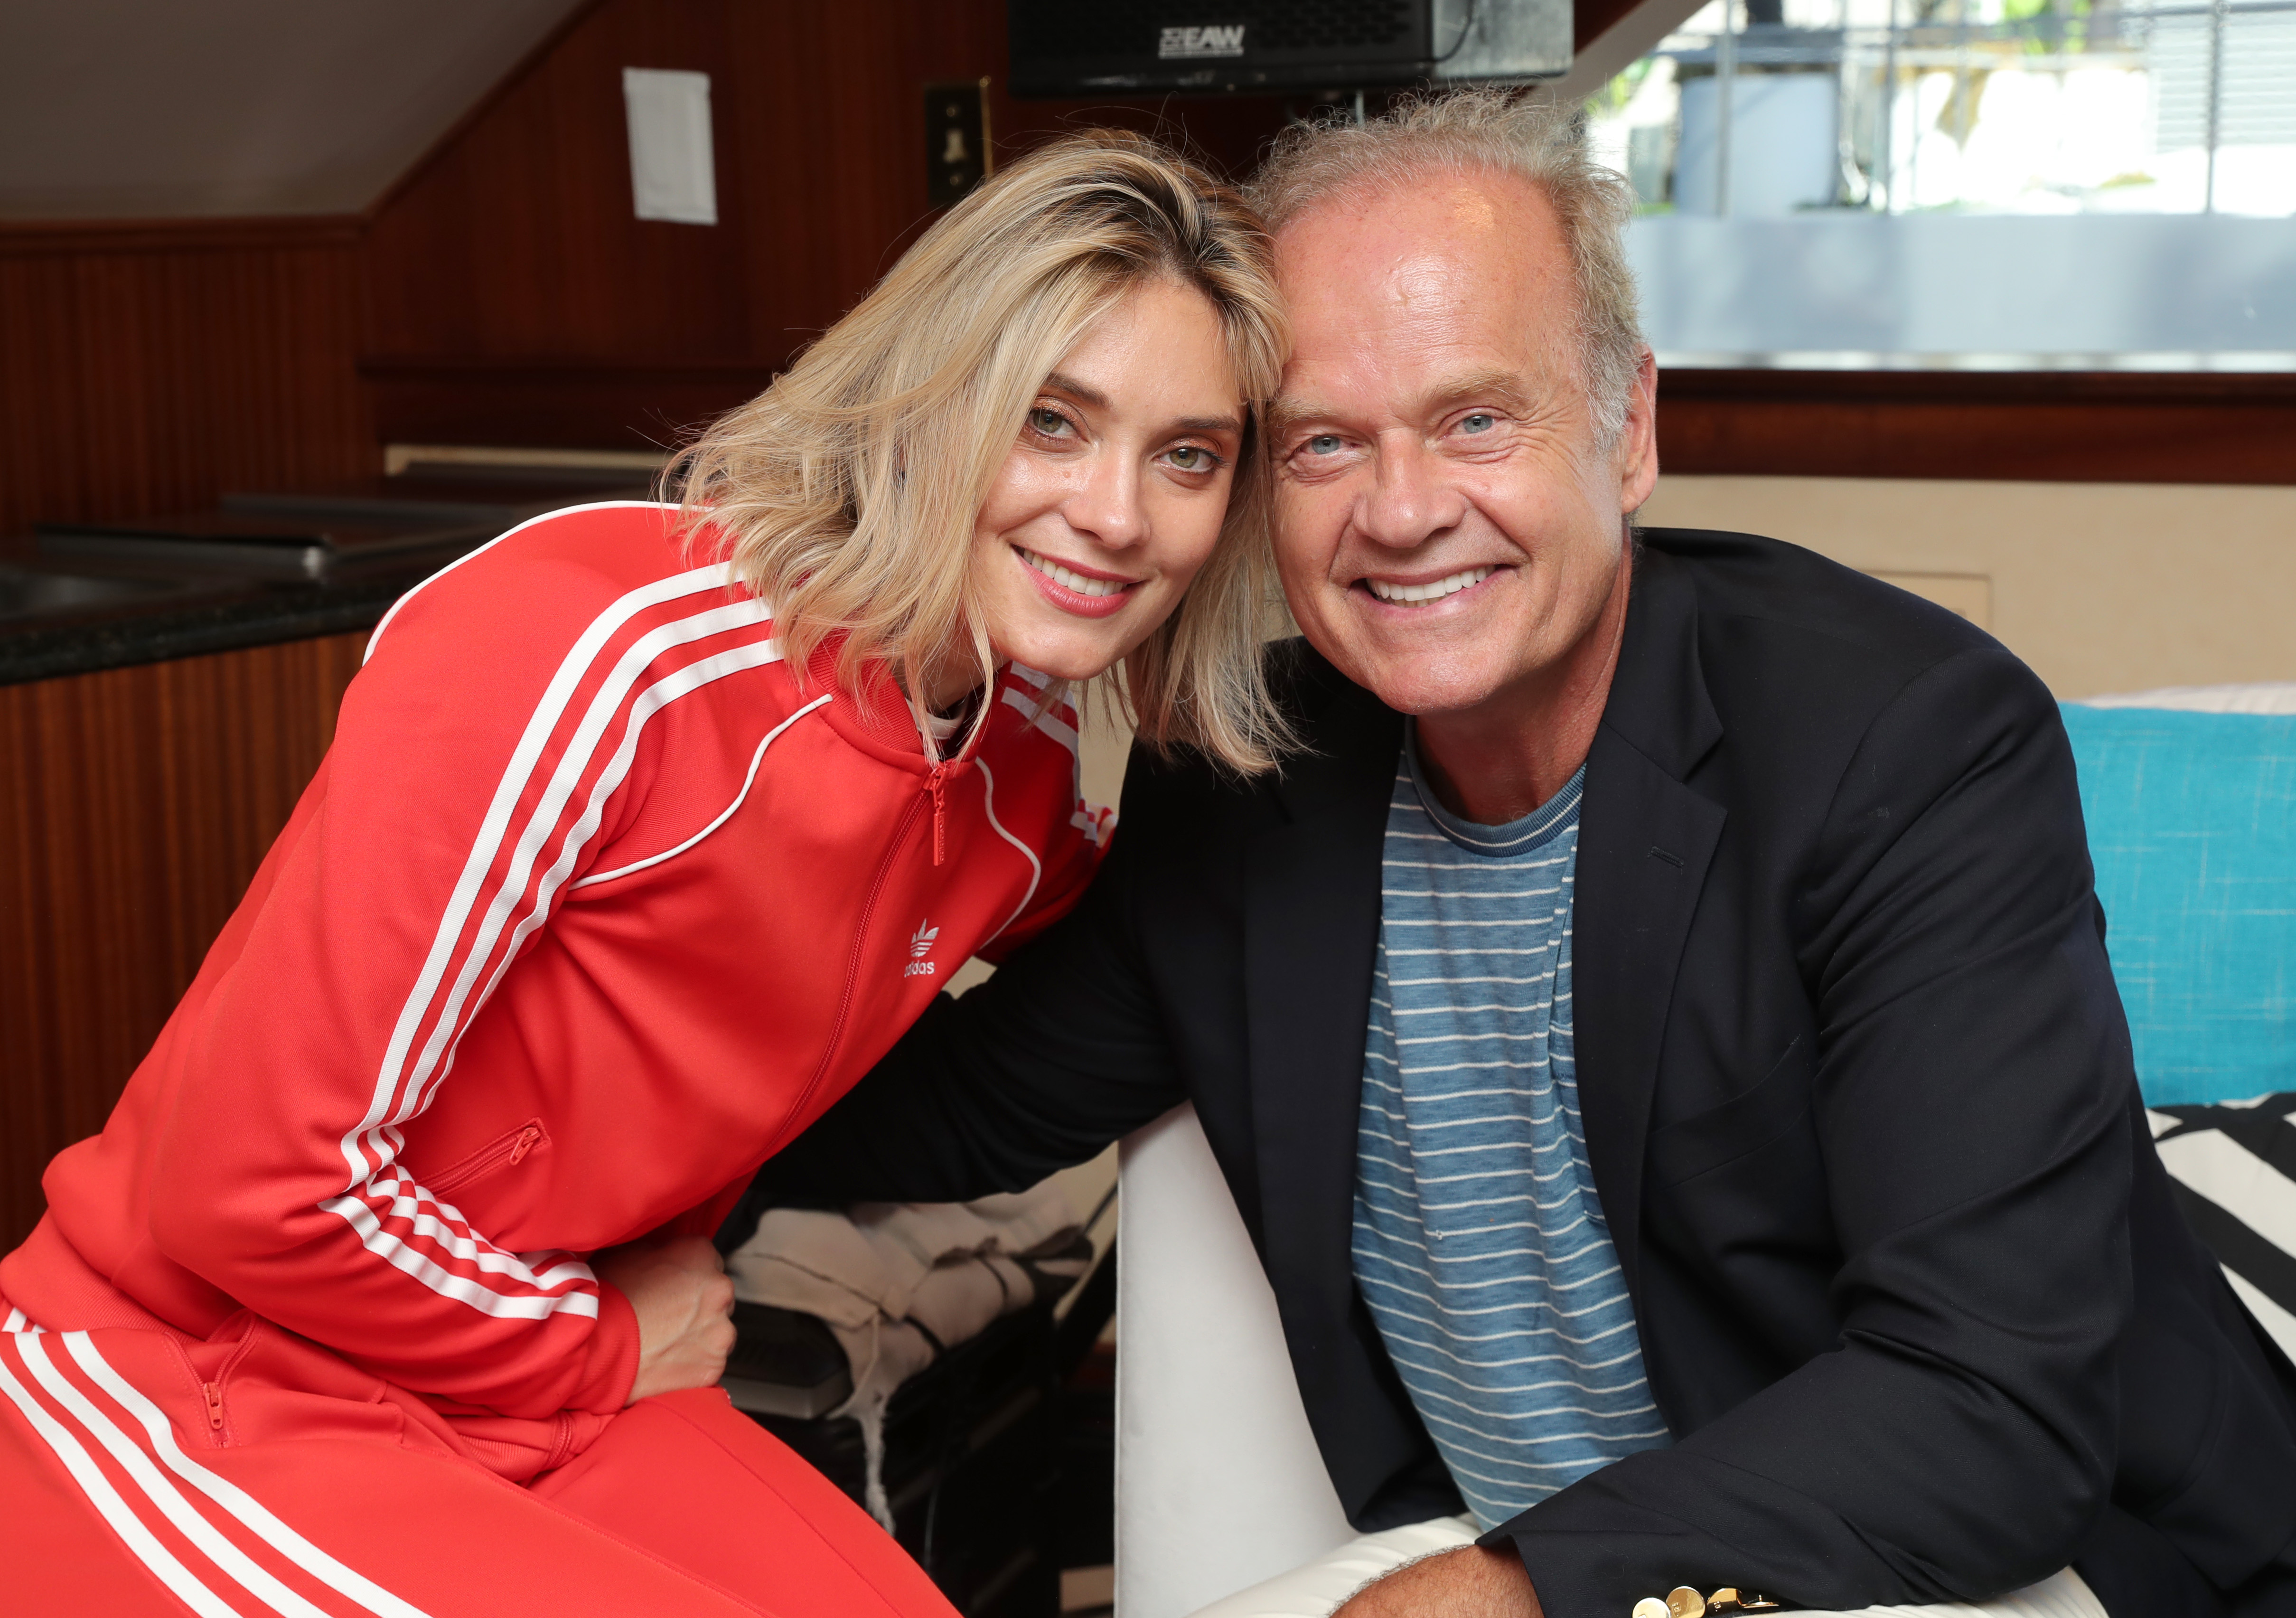 Spencer and Kelsey Grammer at the #IMDboat at San Diego Comic-Con on July 20, 2019, in San Diego, California | Source: Getty Images